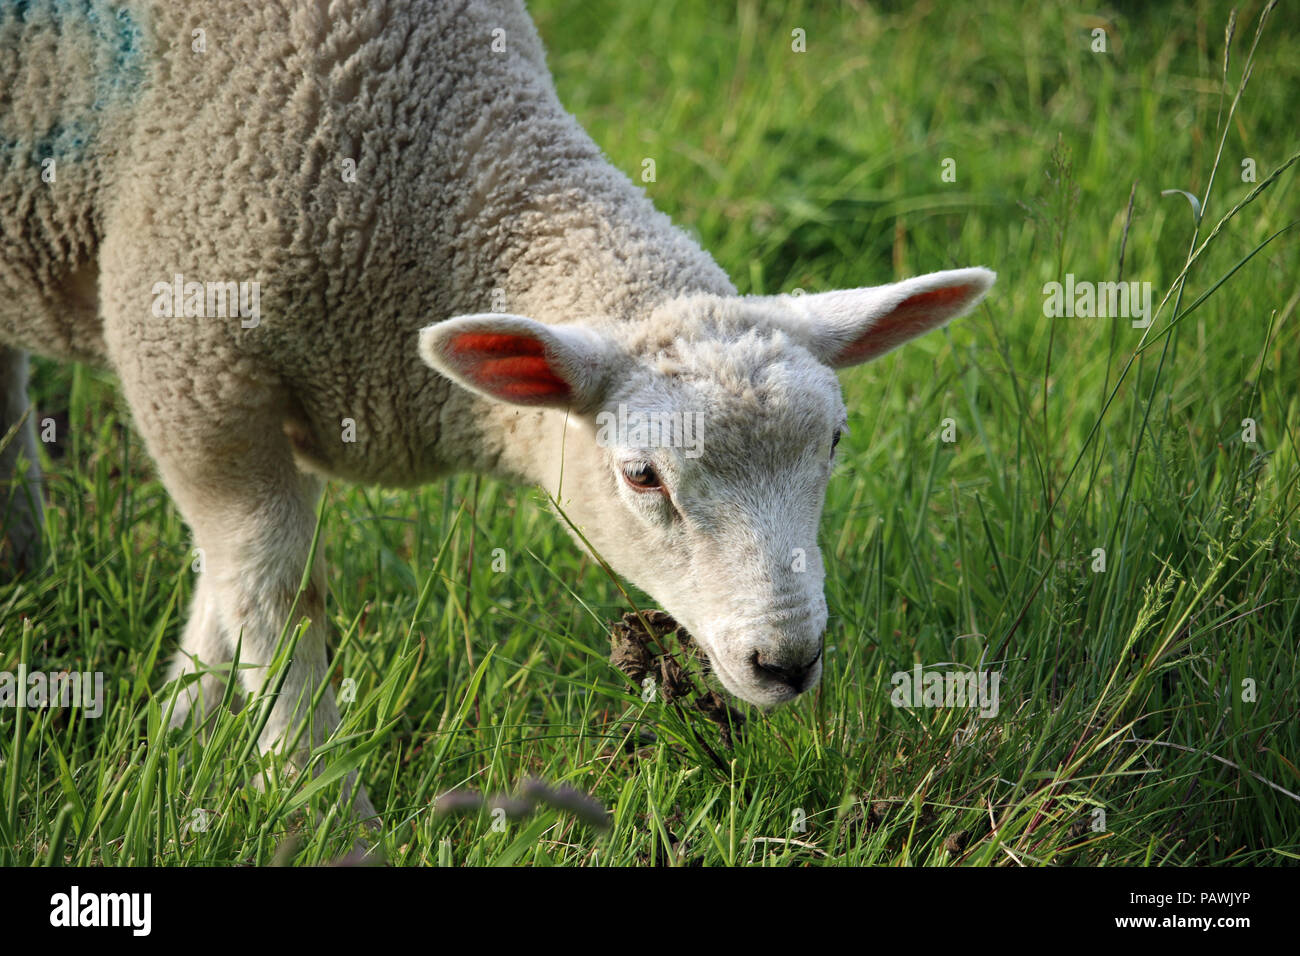 Head and shoulders of a white sheep lamb grazing grass in a field in springtime with the grass field as background. Stock Photo